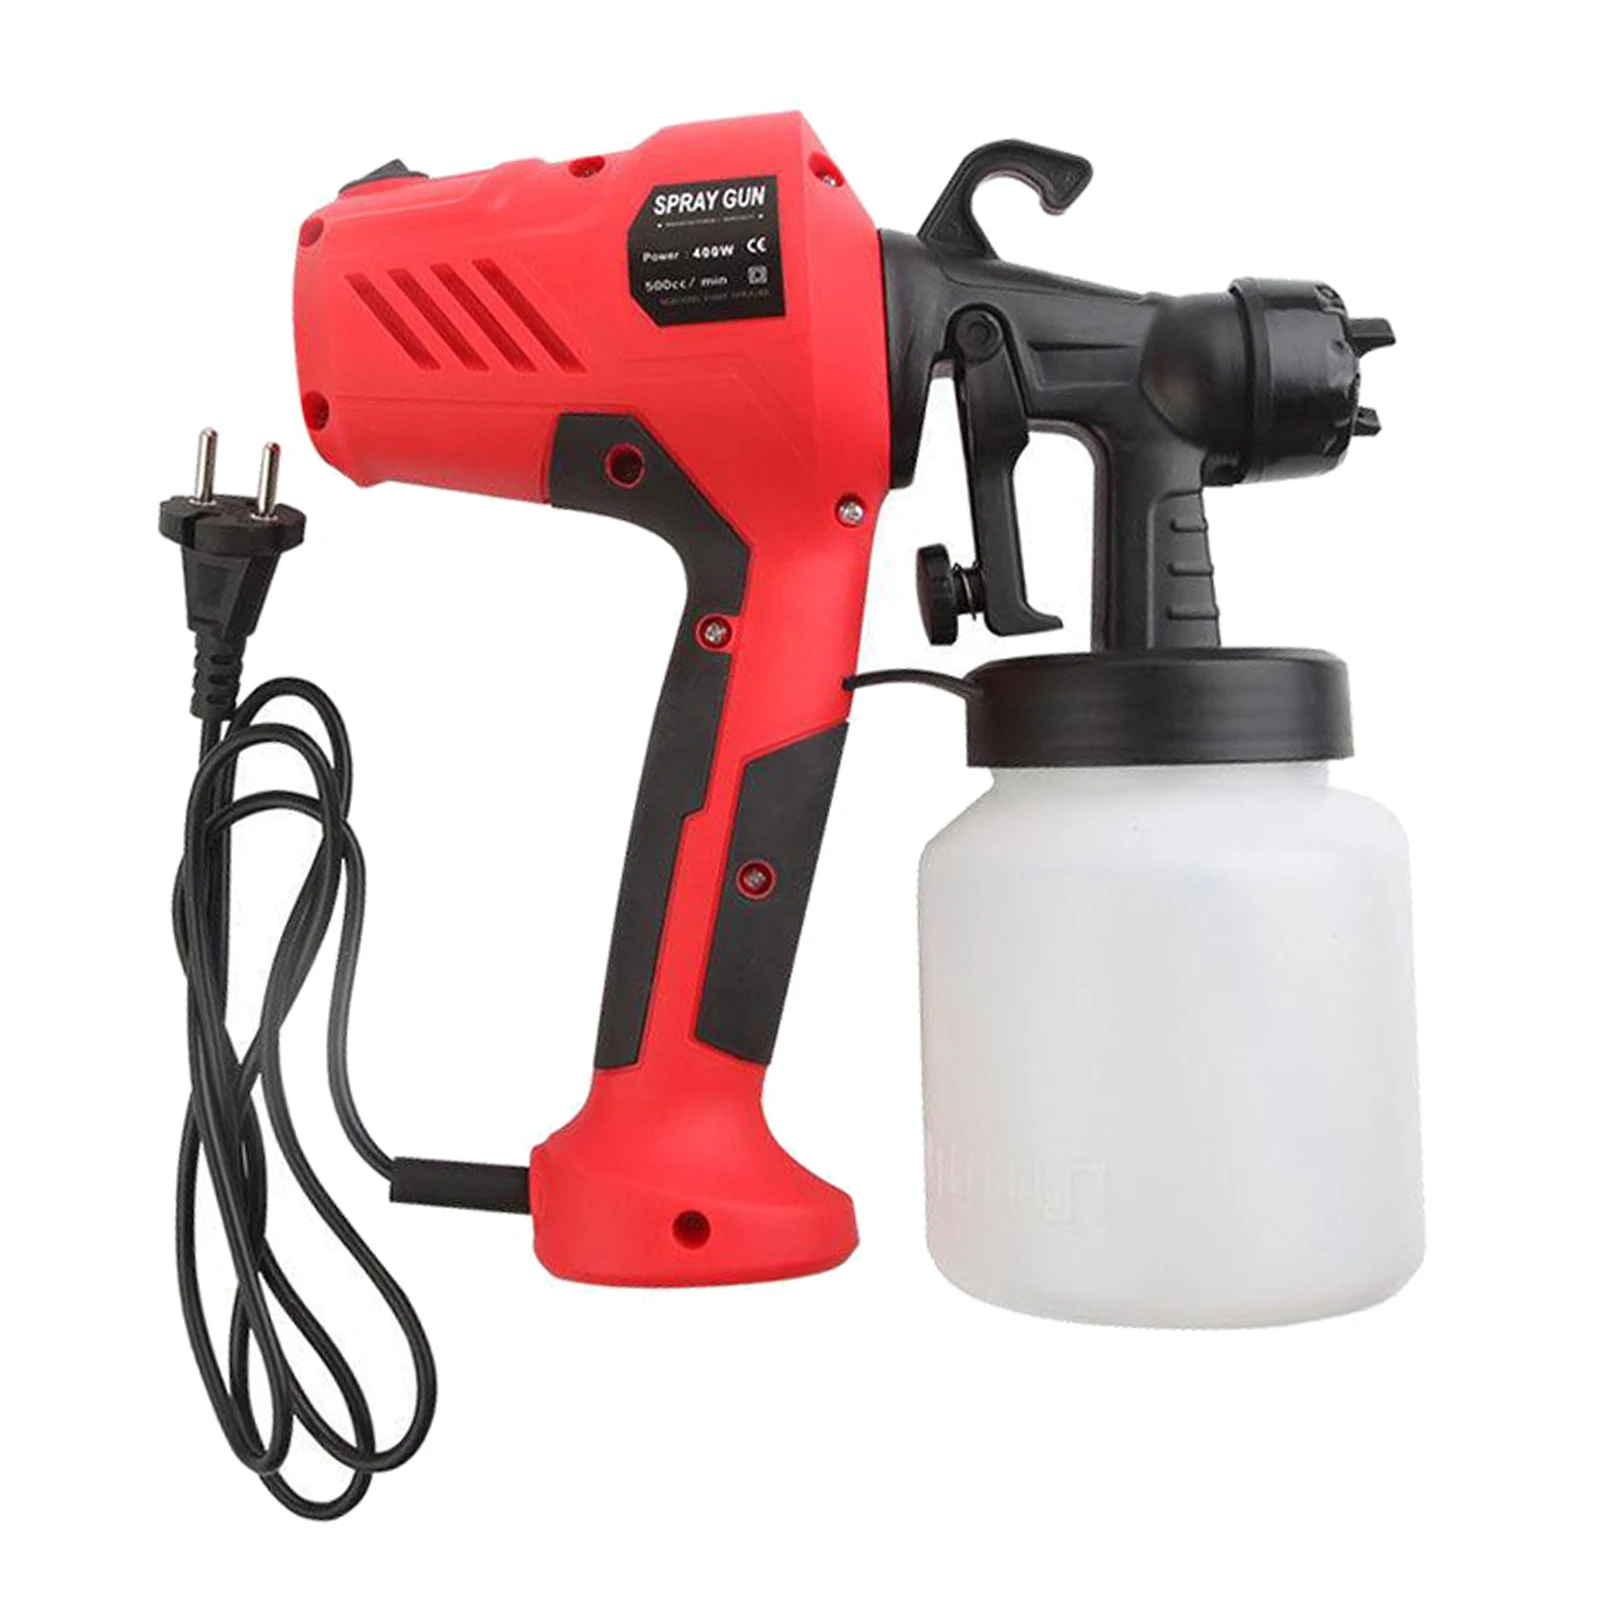 400W Electric Spray Gun Disinfection Liquid Paint Sprayer Gun Painting Tool Home Power Stain Exterior Electric Automotive